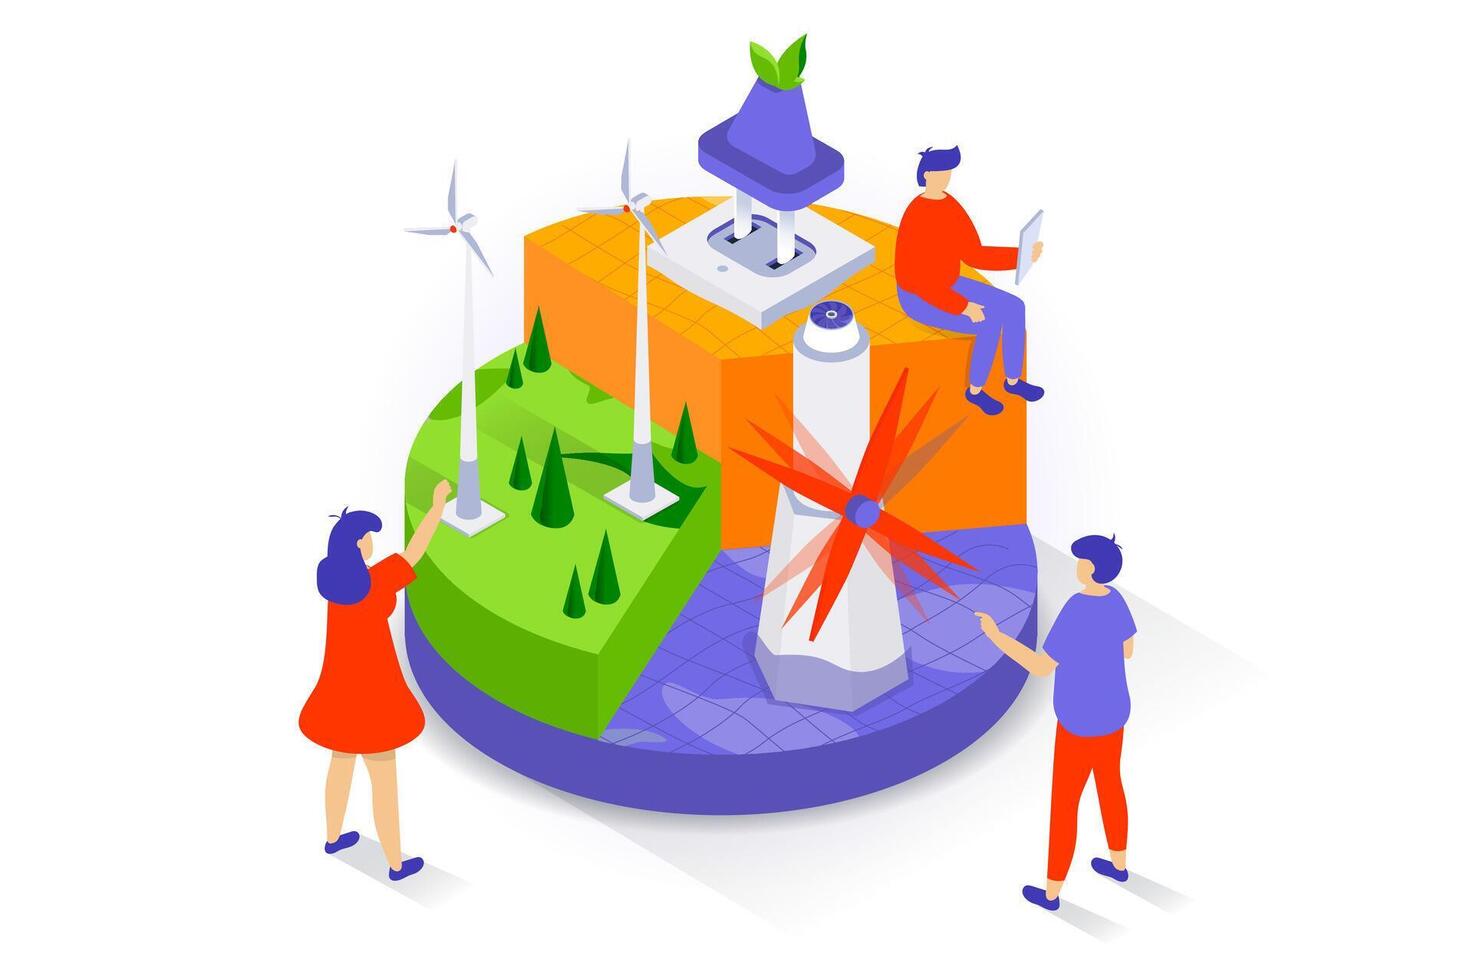 Eco lifestyle concept in 3d isometric design. People using of green electricity resources with alternative renewable energy of wind turbines. Vector illustration with isometry scene for web graphic